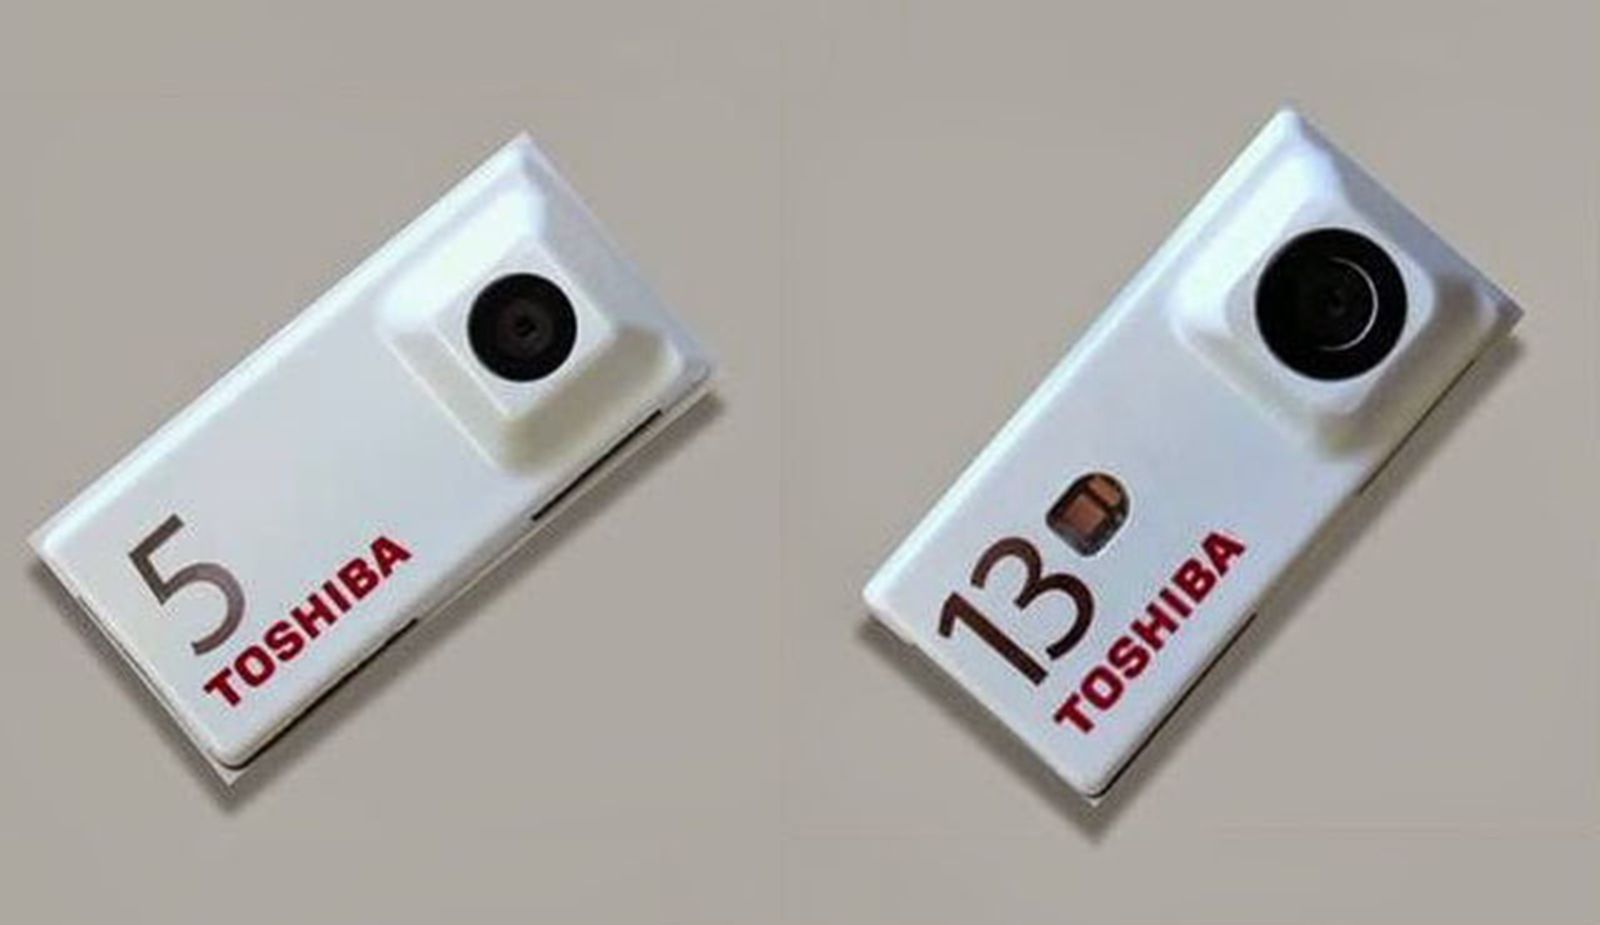 google project ara camera modules revealed for easy swap out upgrades image 2